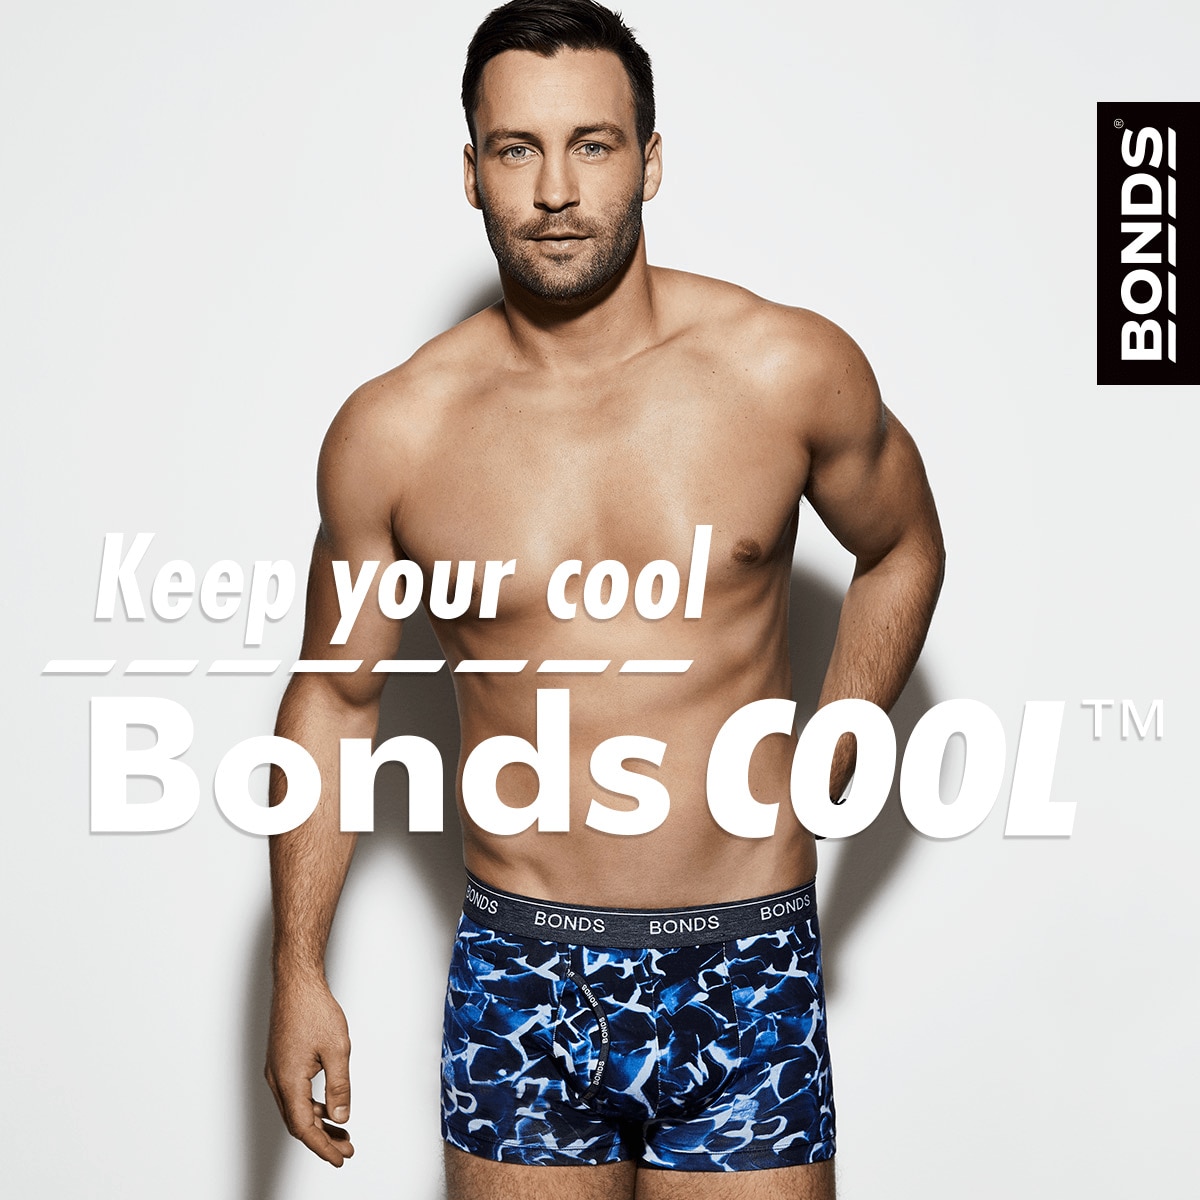 KEEP COOL THIS FATHER'S DAY WITH BONDS COOL™ UNDIES